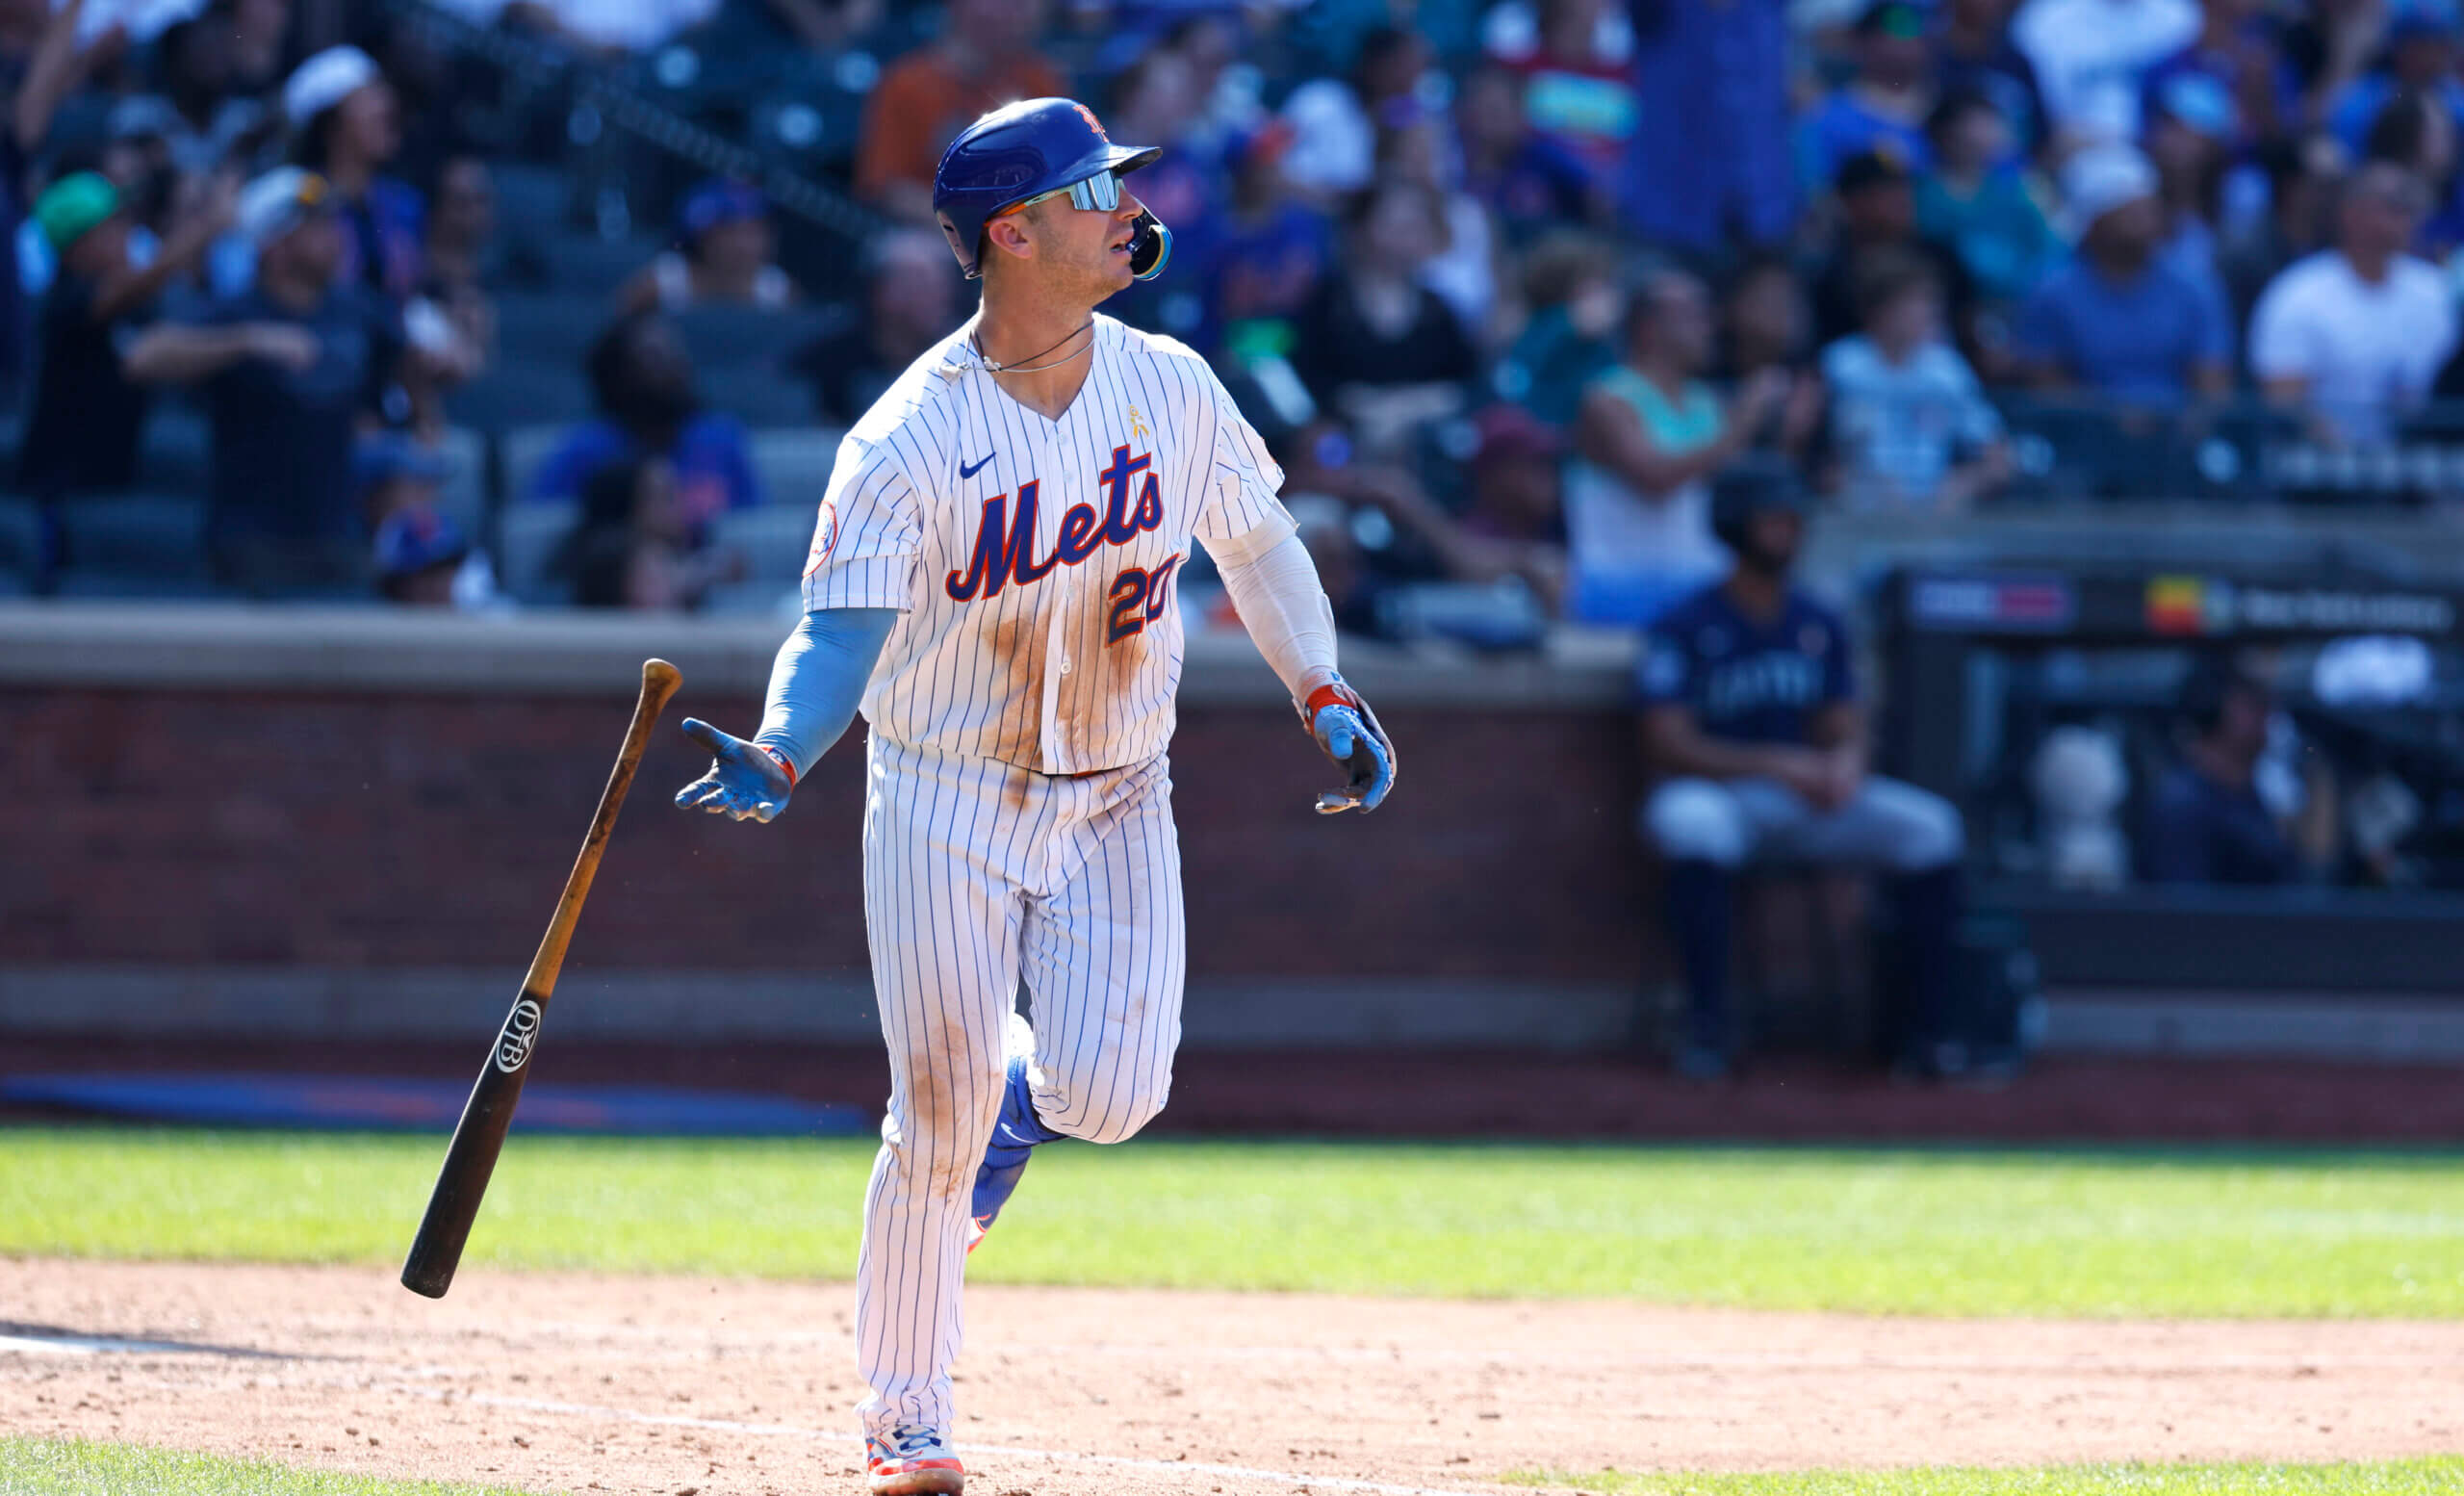 NY Mets: How much would a Pete Alonso contract extension cost?